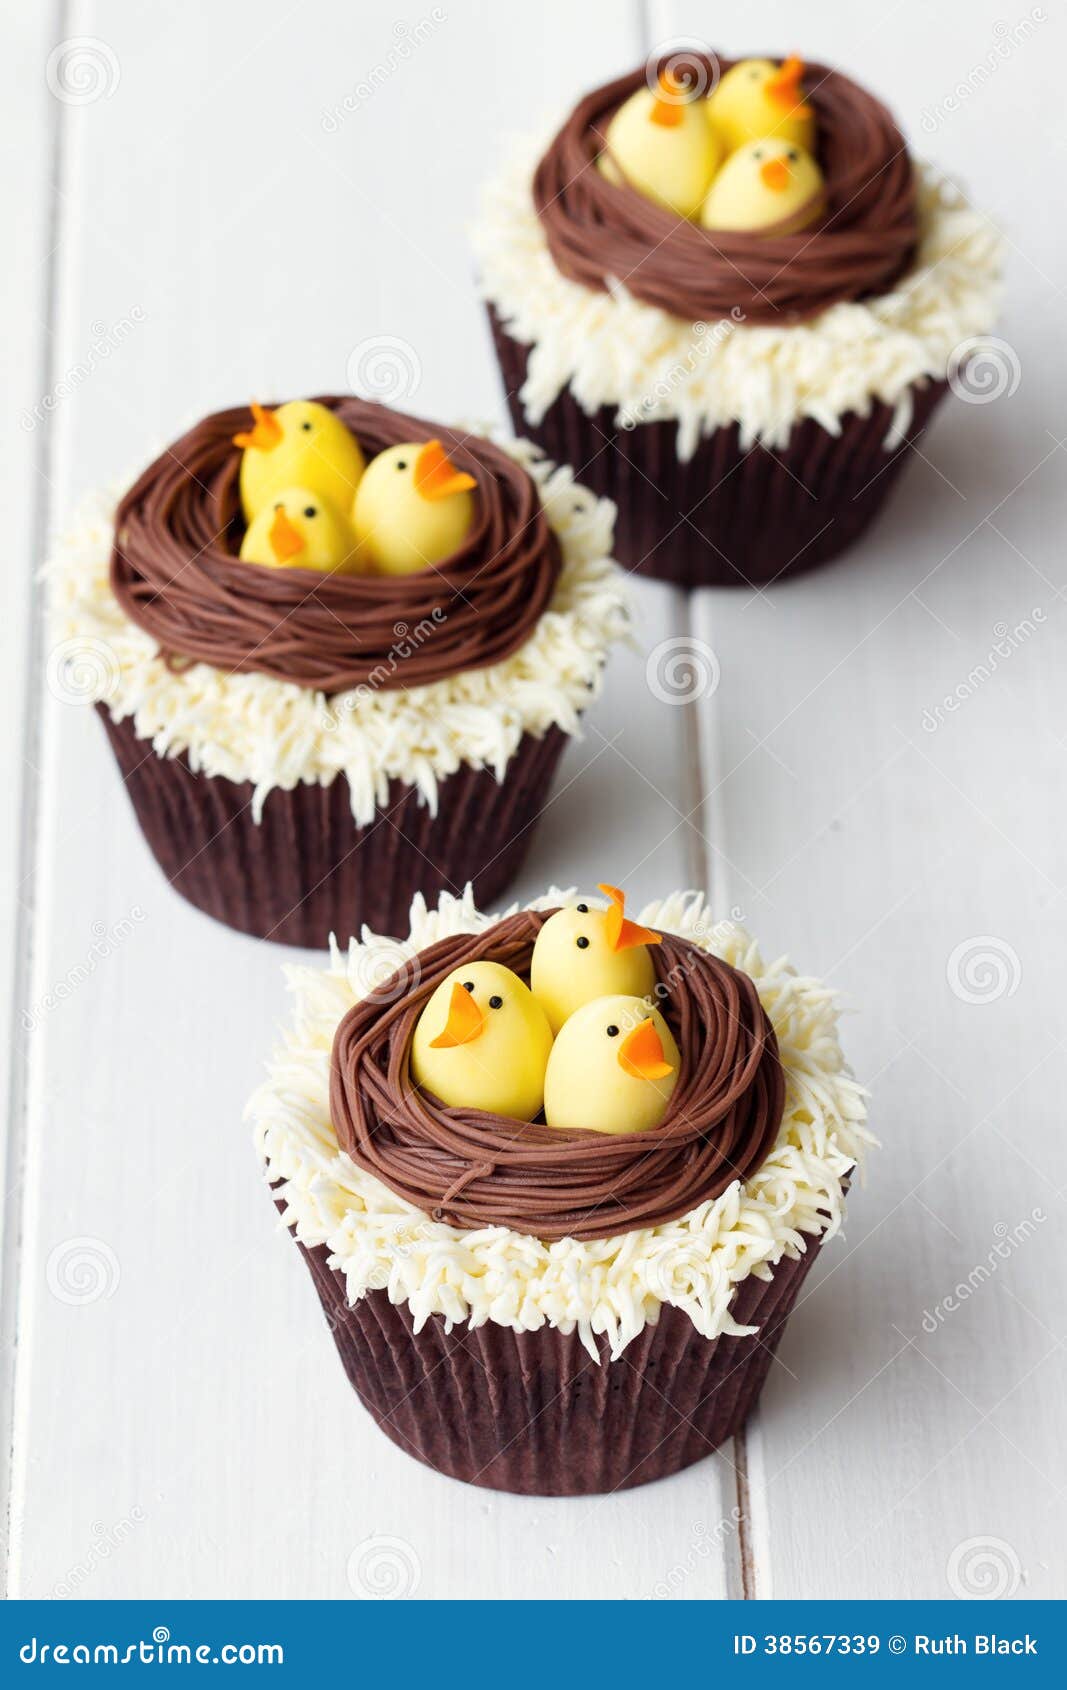 Easter chick cupcakes stock image. Image of snack, holidays - 38567339